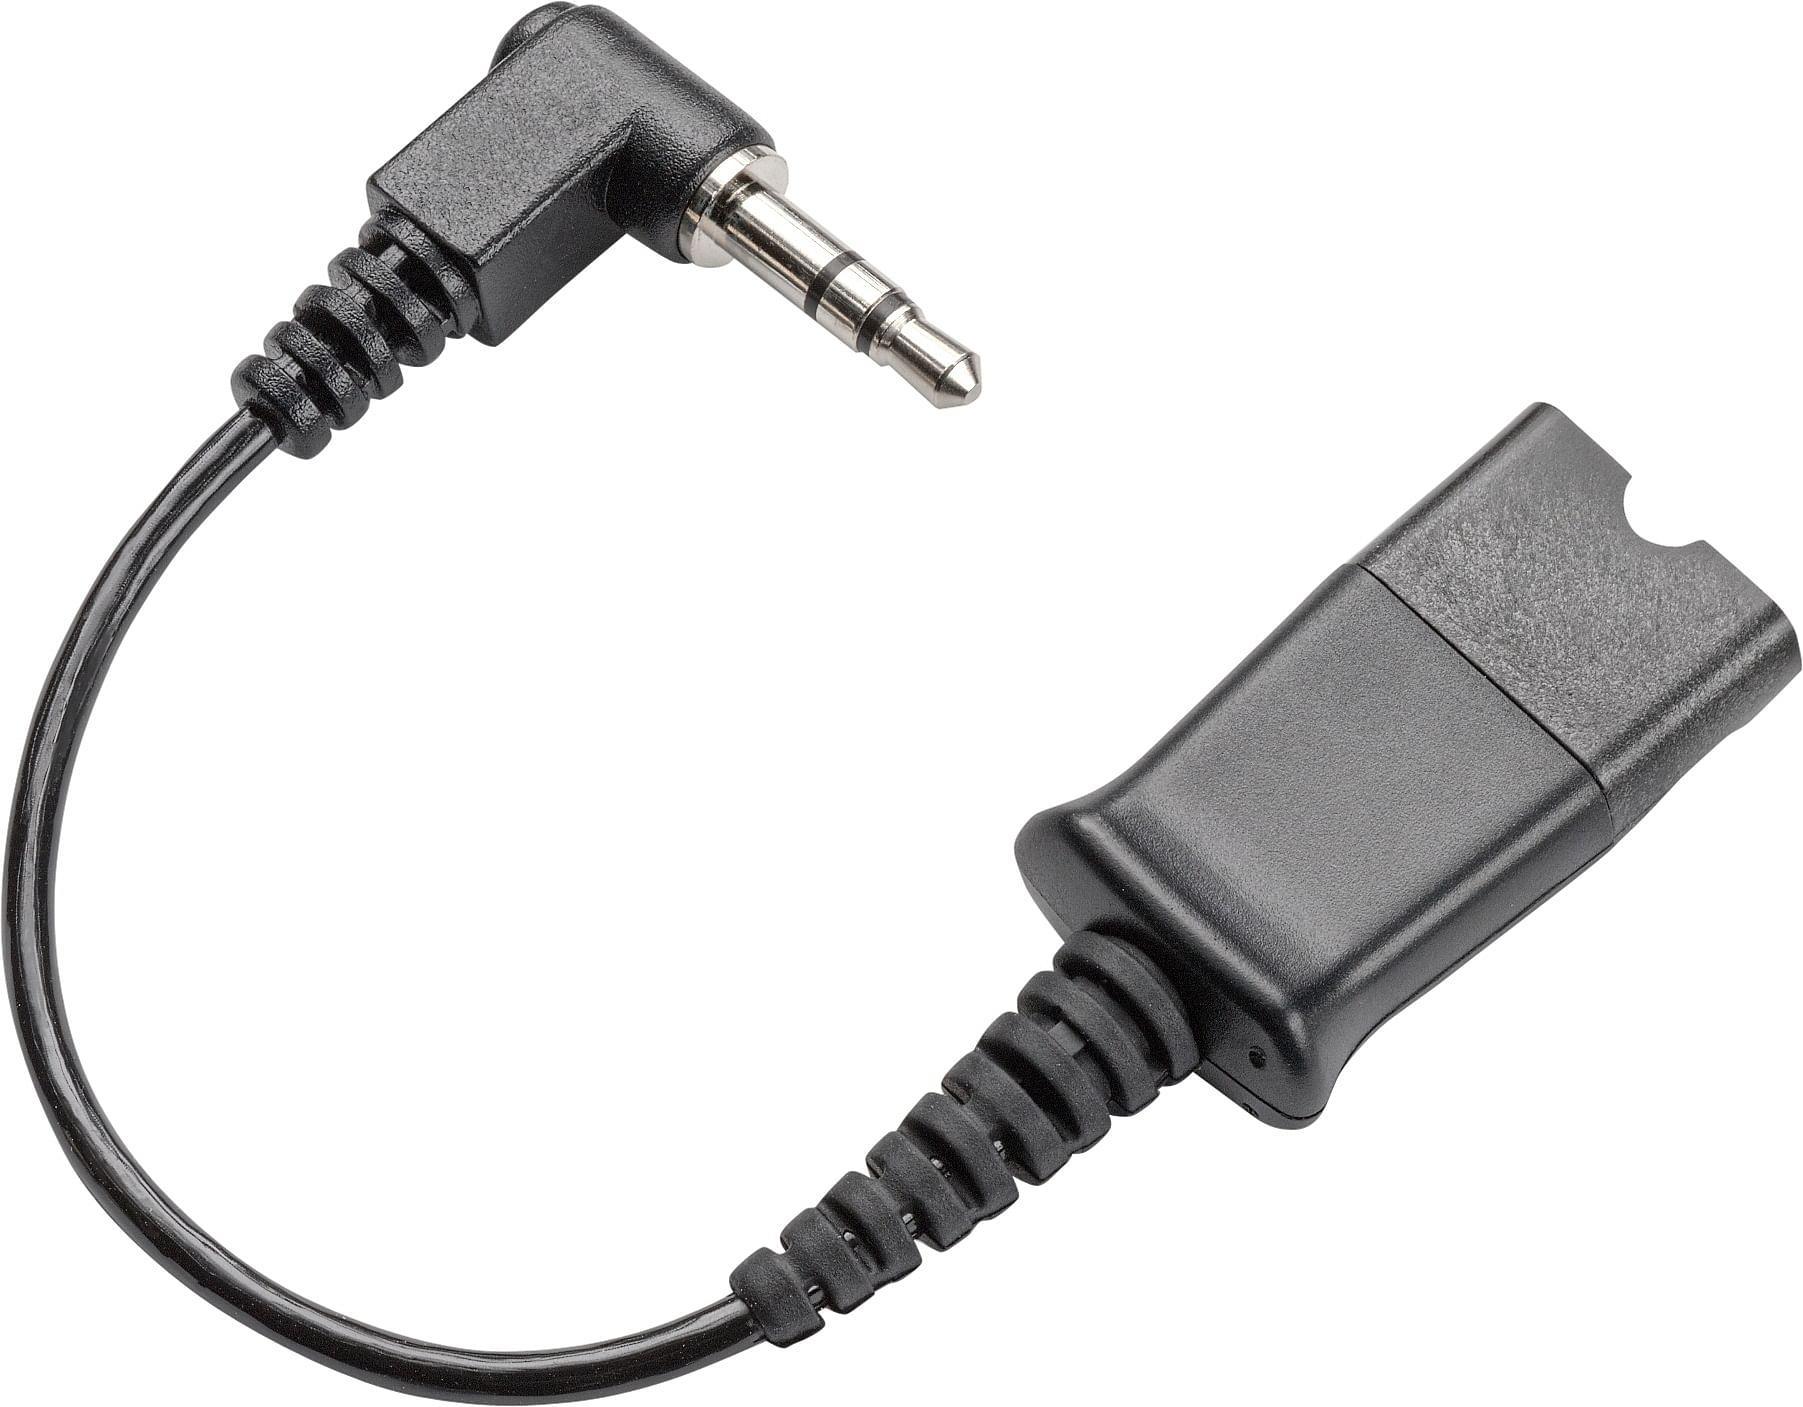 Poly Quick Disconnect Cable to 3.5mm Black [40845-01]